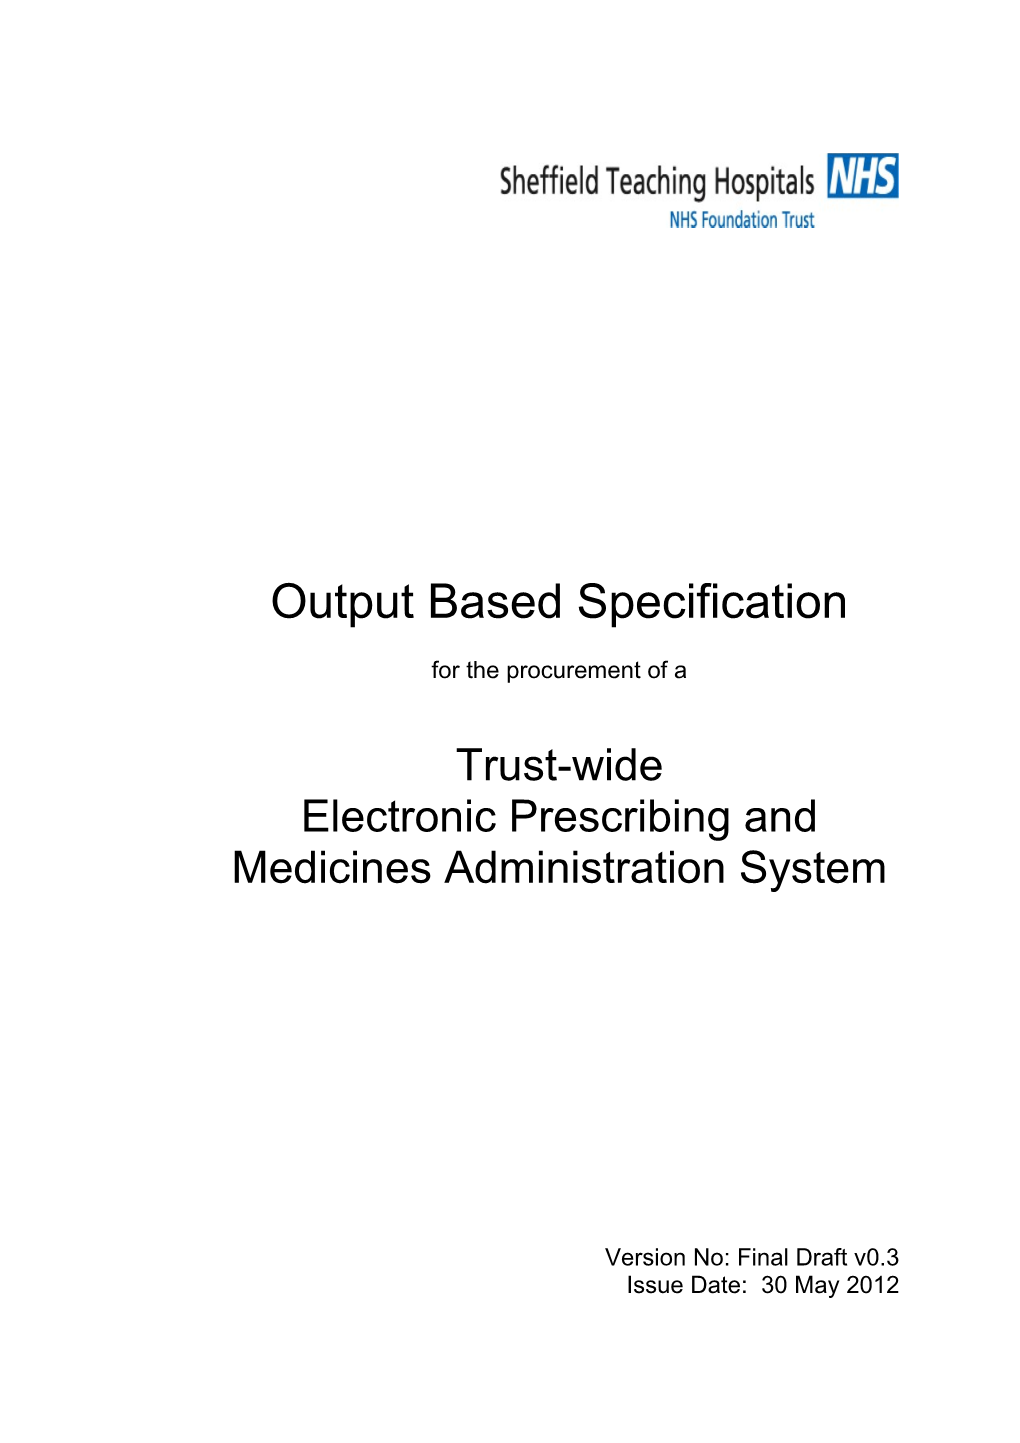 Electronic Prescribing and Medicines Administration System